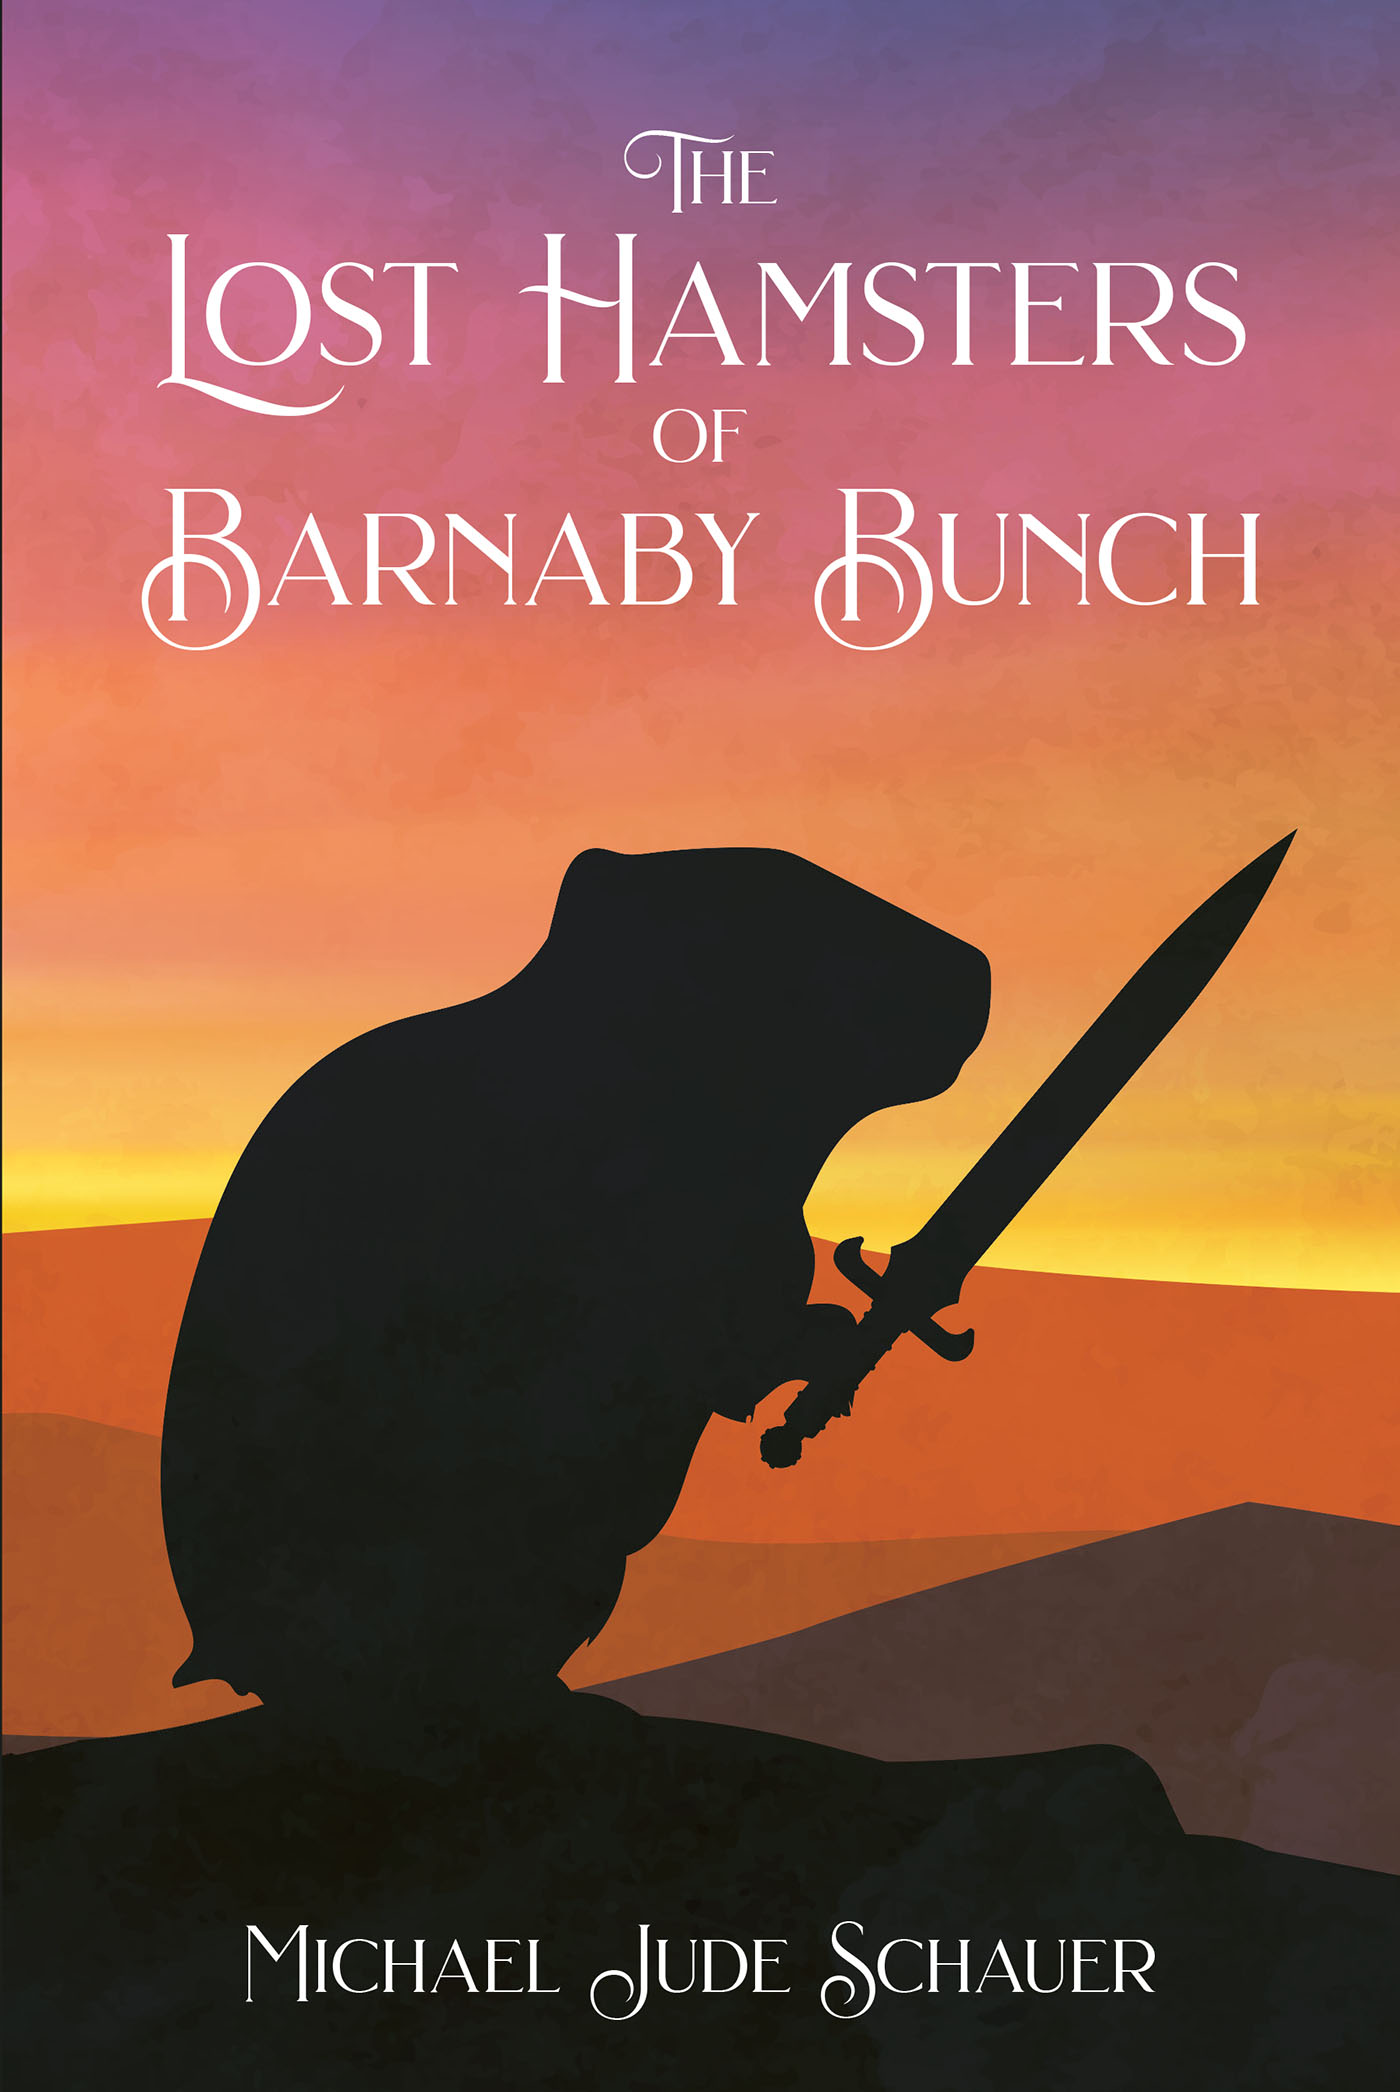 Michael Jude Schauer’s newly released “The Lost Hamsters of Barnaby Bunch” is a surprising fantasy adventure with heart.